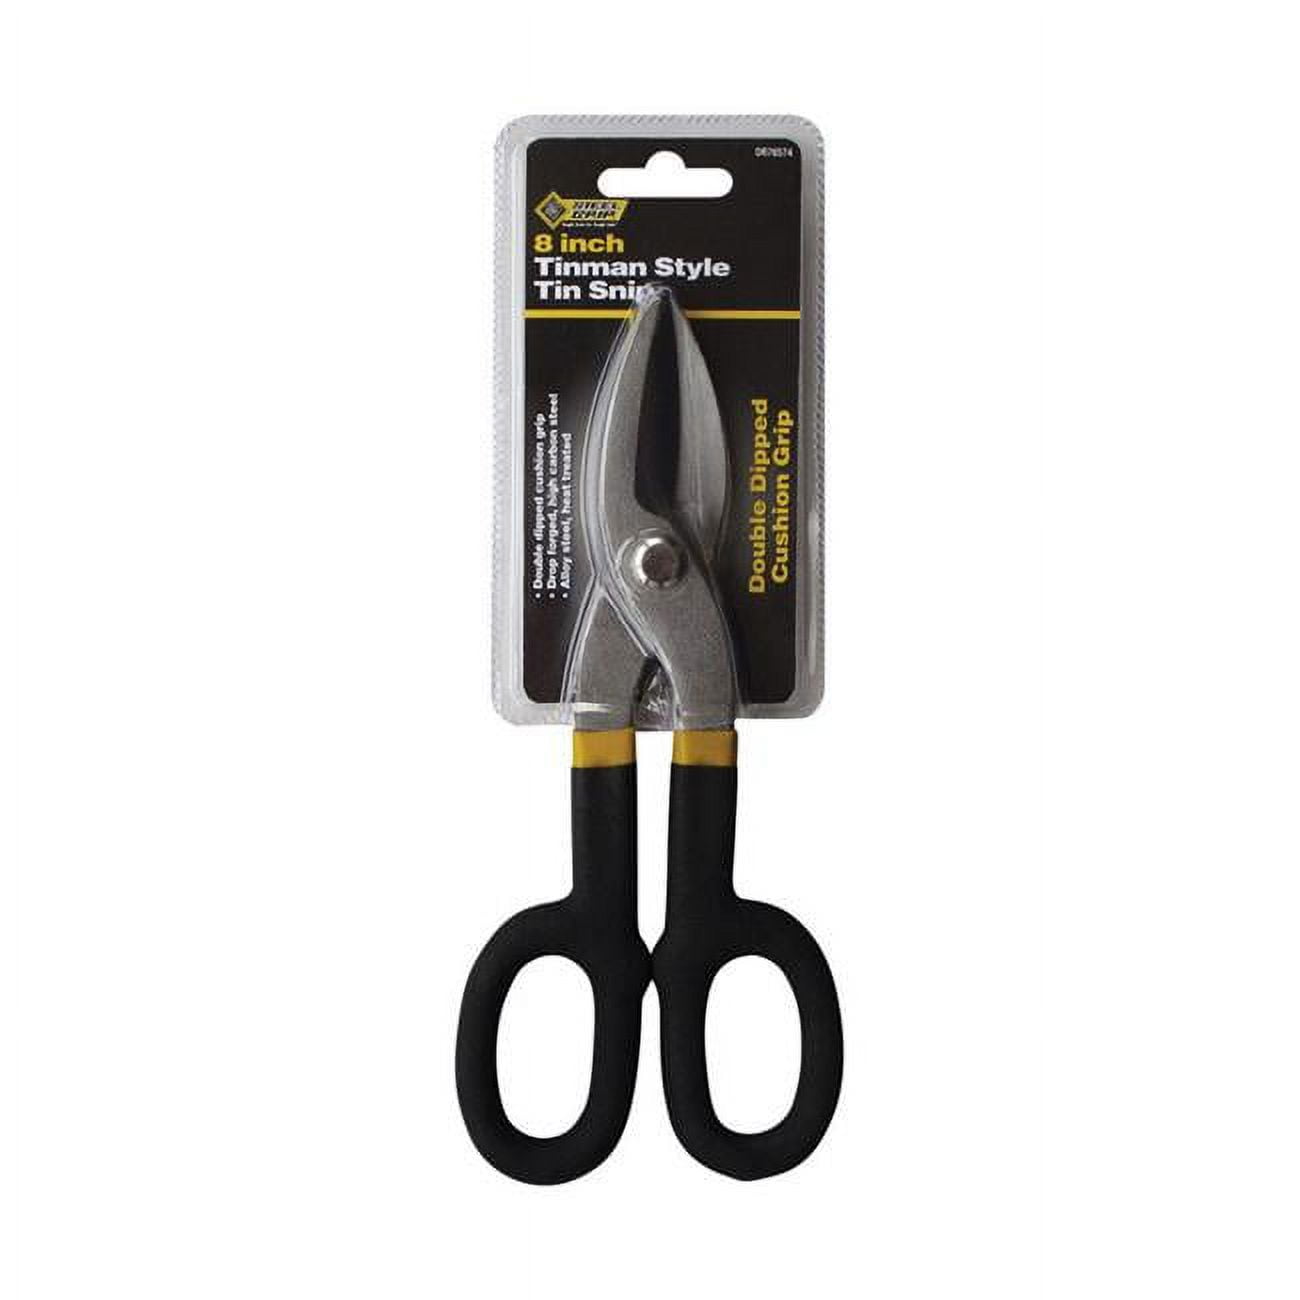 2796605 8 In. Carbon Steel Straight Tin Snips, Black